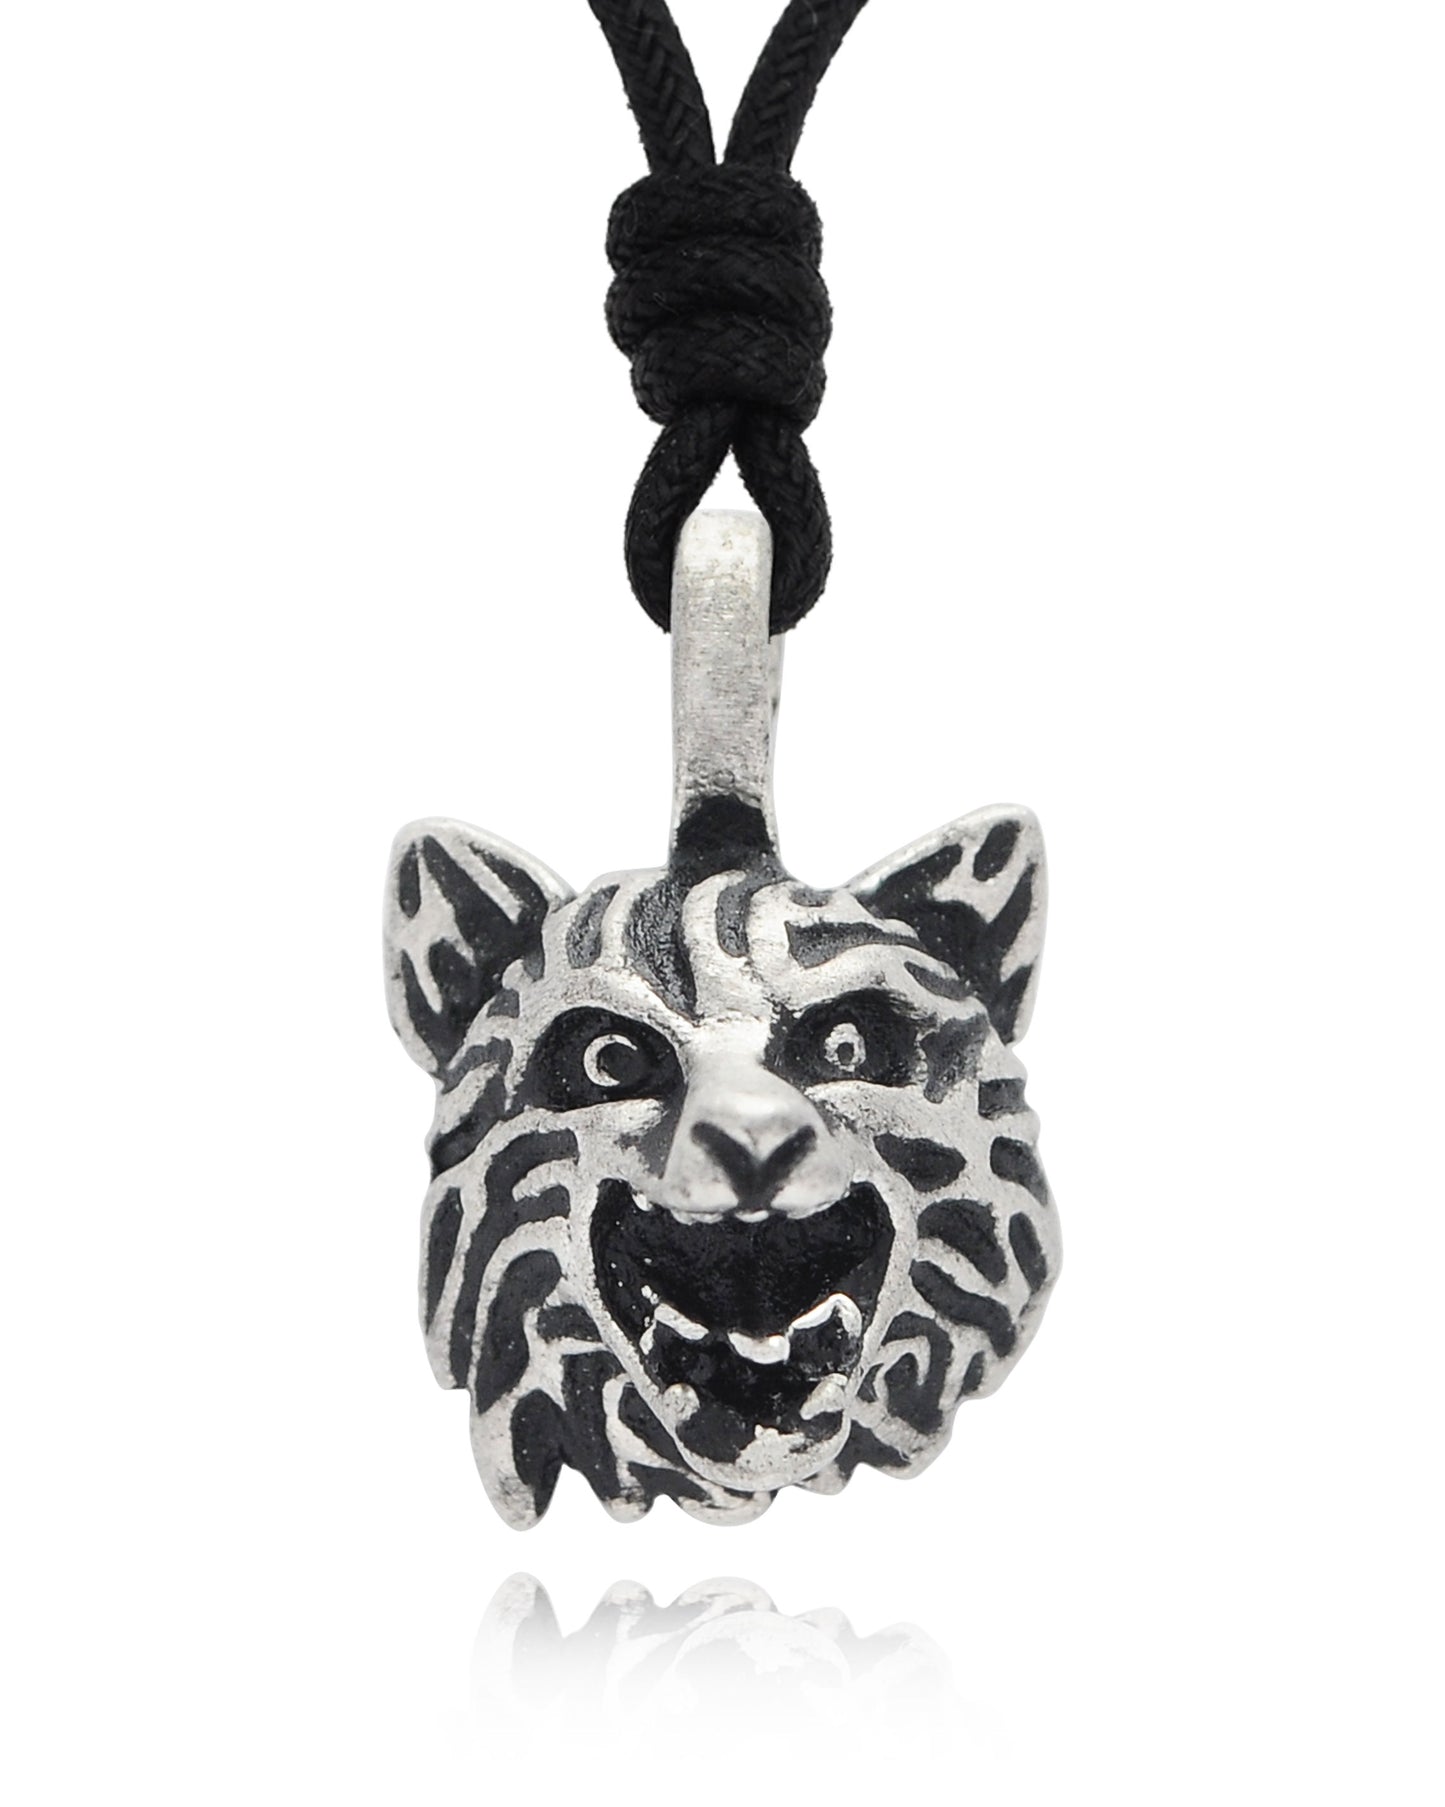 Wolf Head Dog Silver Pewter Charm Necklace Pendant Jewelry With Cotton Cord